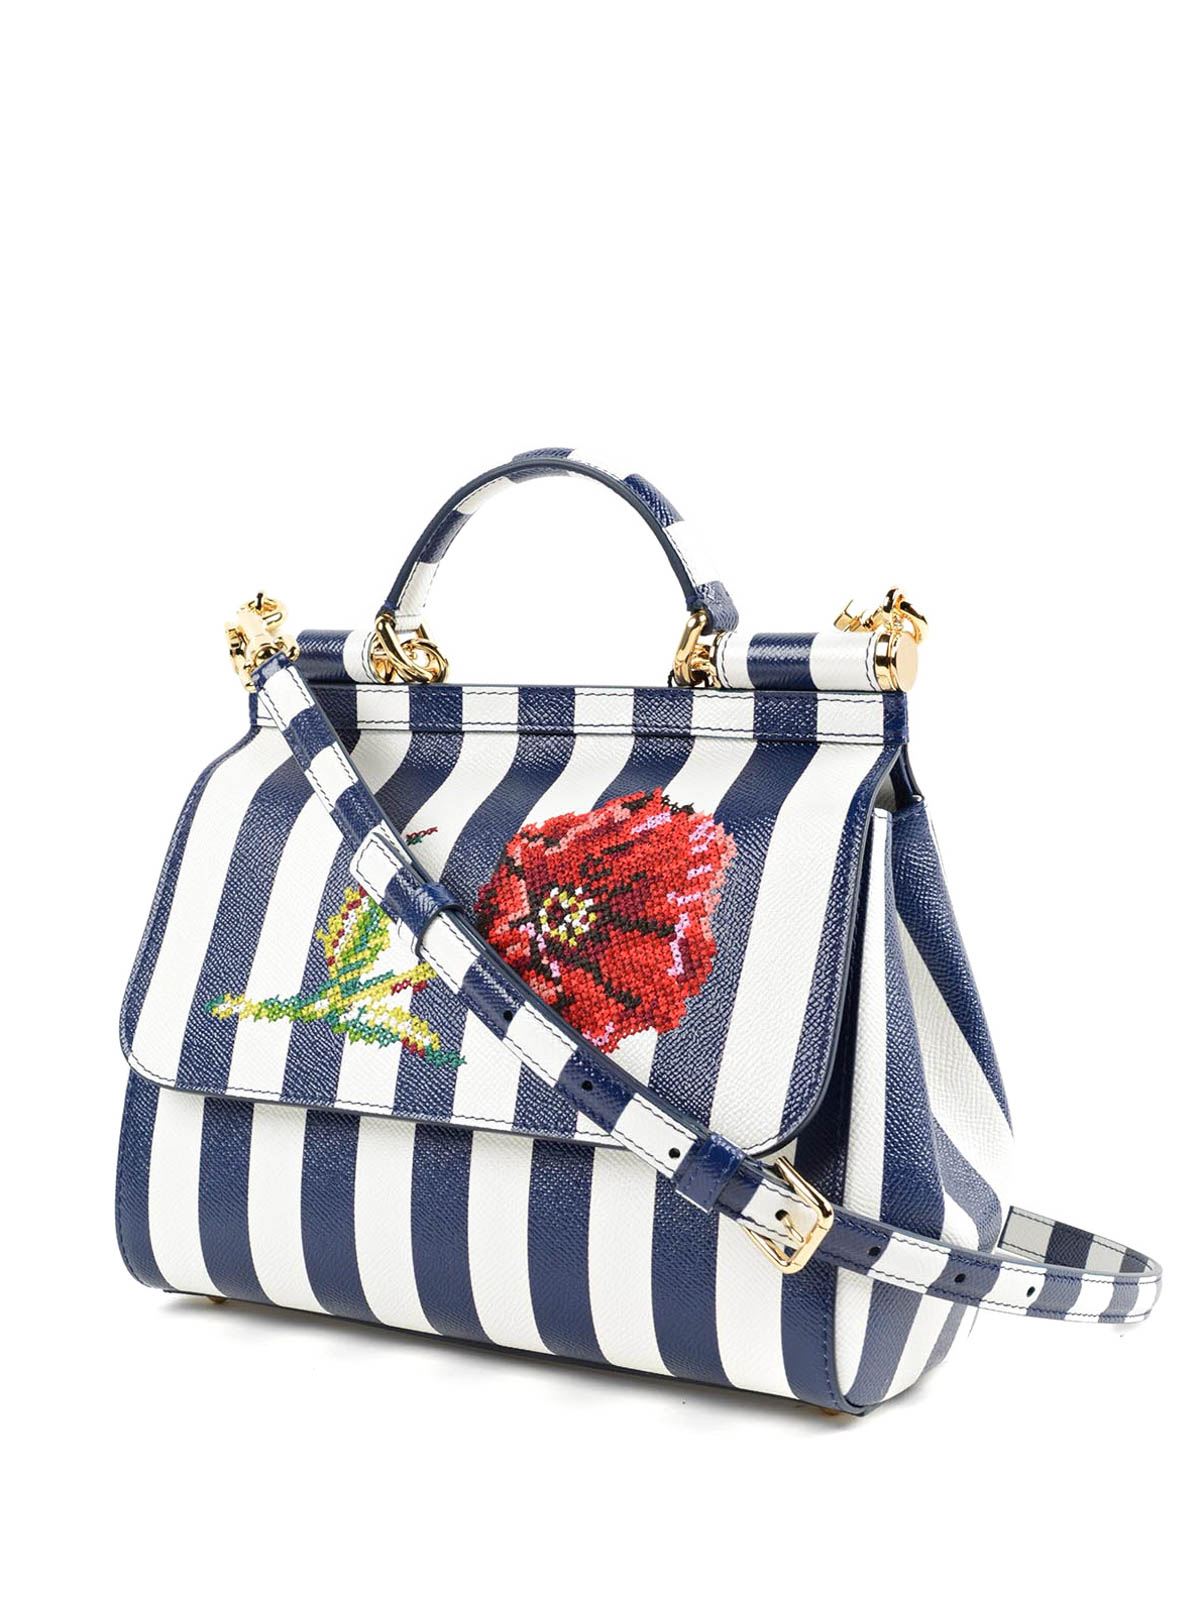 Totes bags Dolce & Gabbana - Sicily striped leather bag - BB6002AC6188Q600